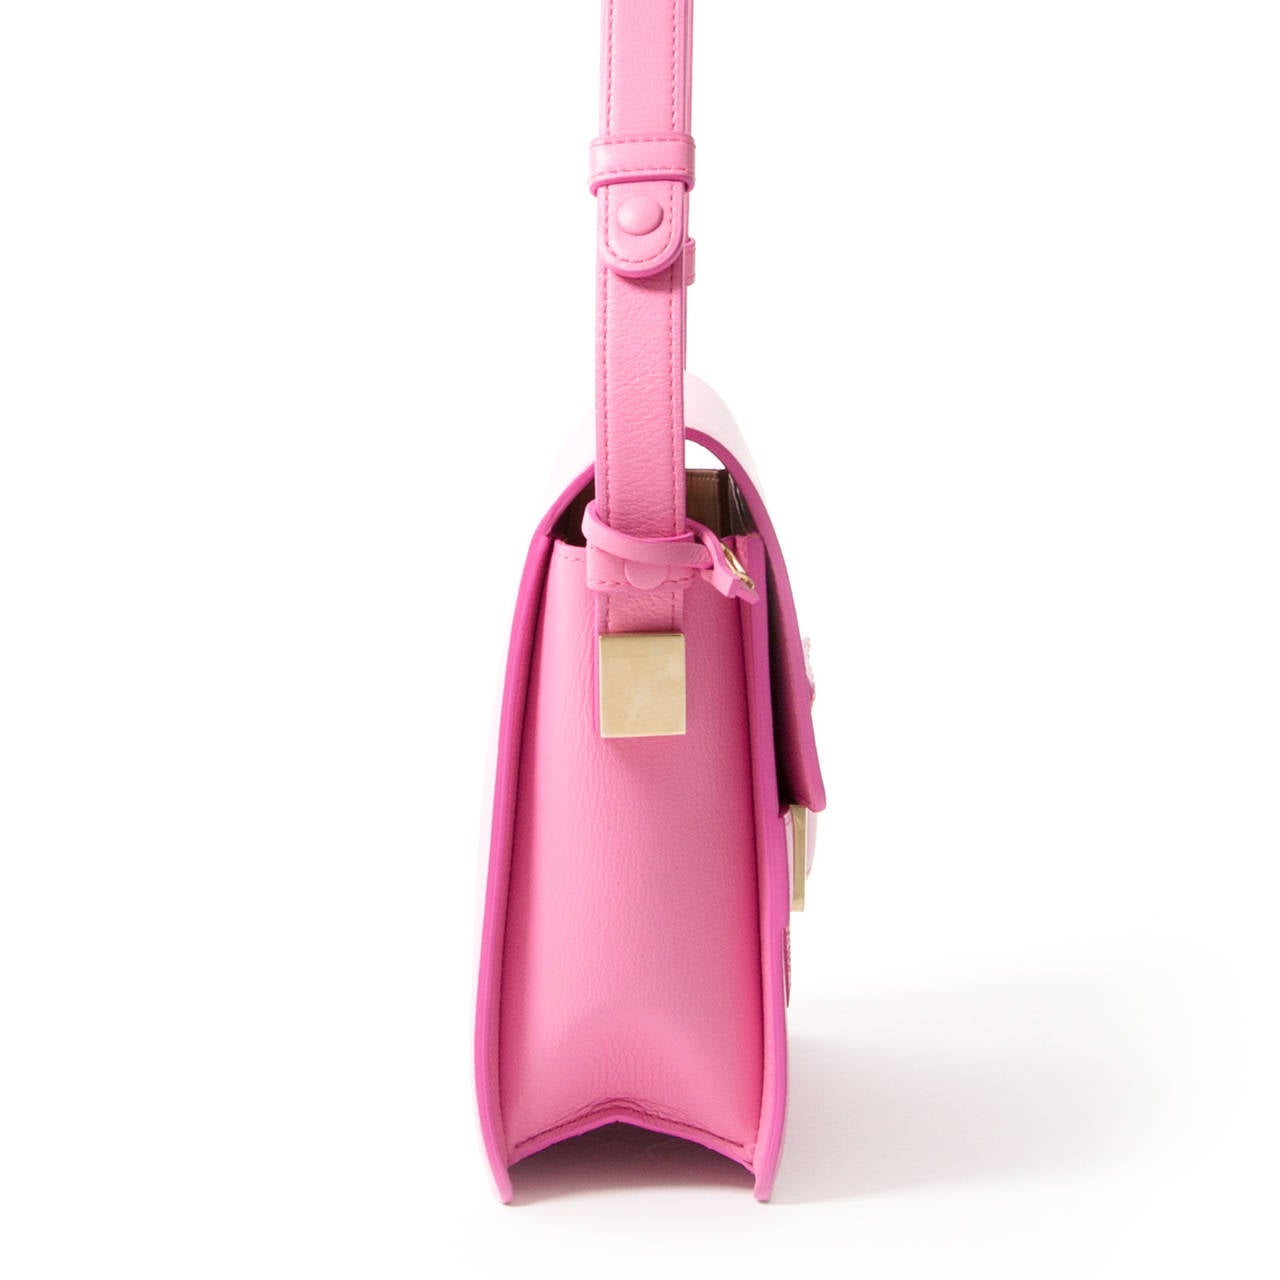 Delvaux Le Madame in beautiful bright pink leather with golden hardware.

Le Madame is a re-edition of a bag that was designed in 1977, which was then called Le Marronnier. The bag has a adjustable strap so you can wear the IT-bag crossbody or